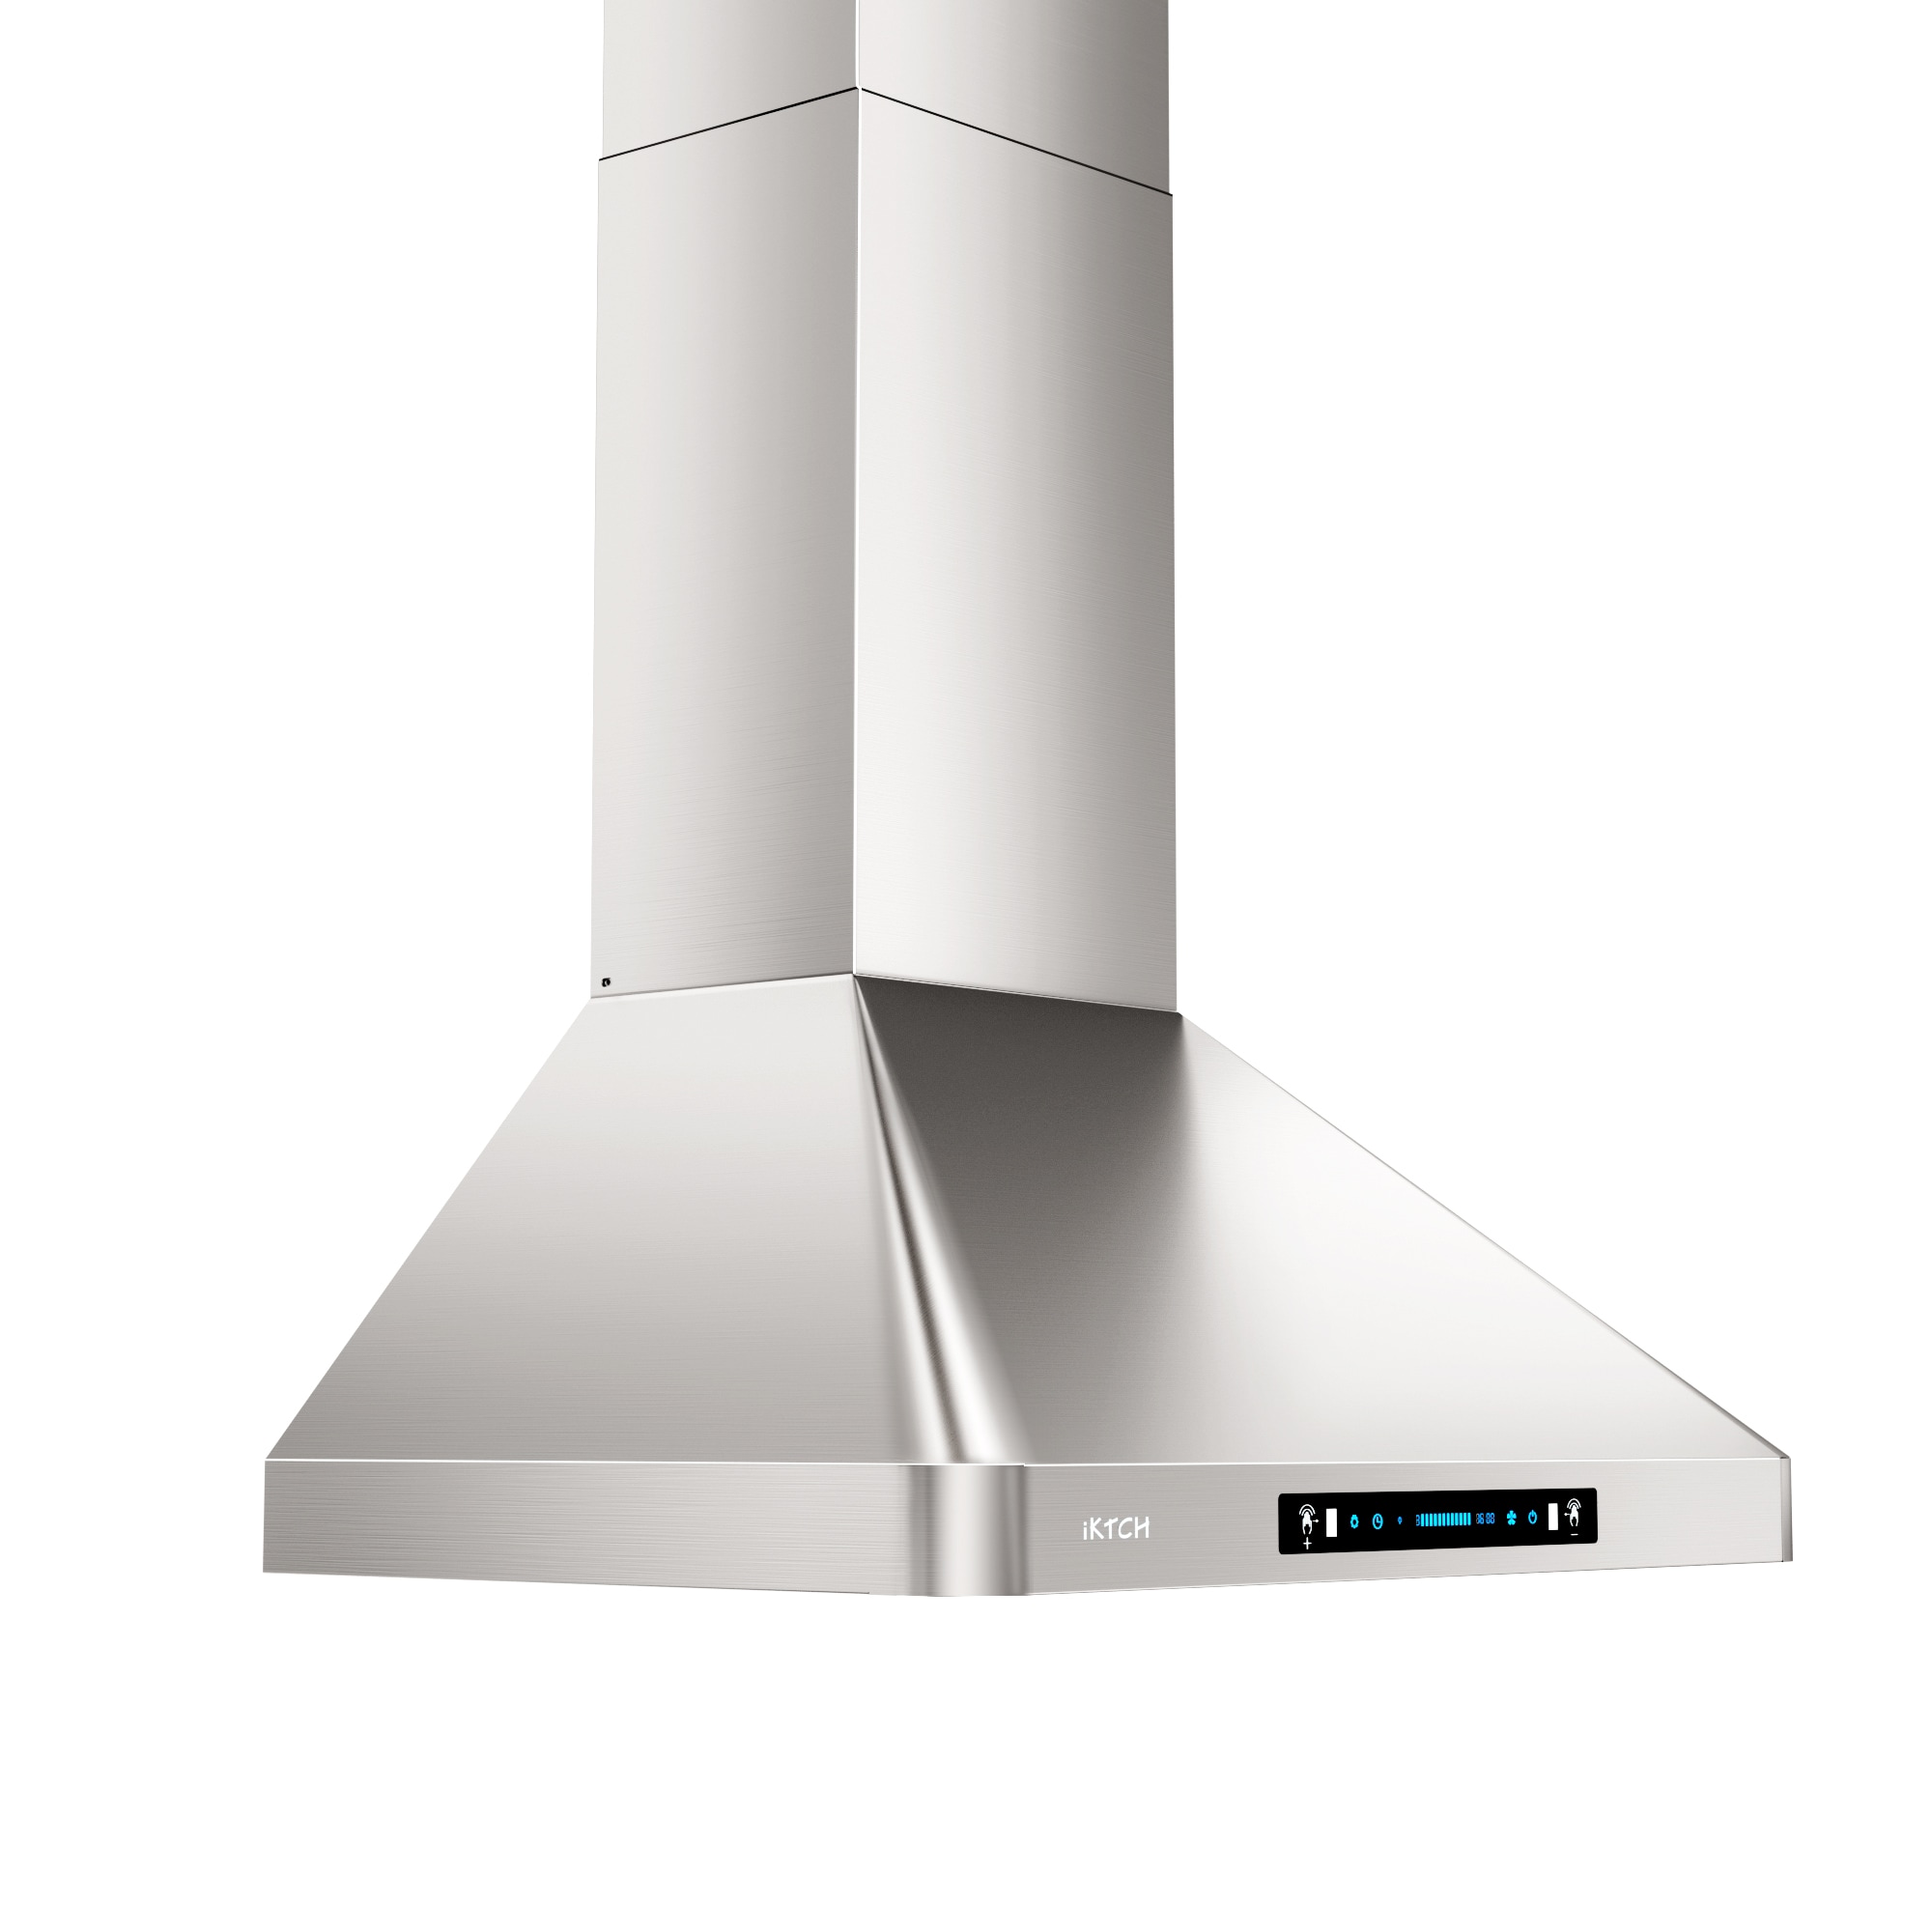 IKTCH 30-inch Wall Mount Range Hood 900 CFM Ducted/Ductless Convertible,  Kitchen Chimney Vent Stainless